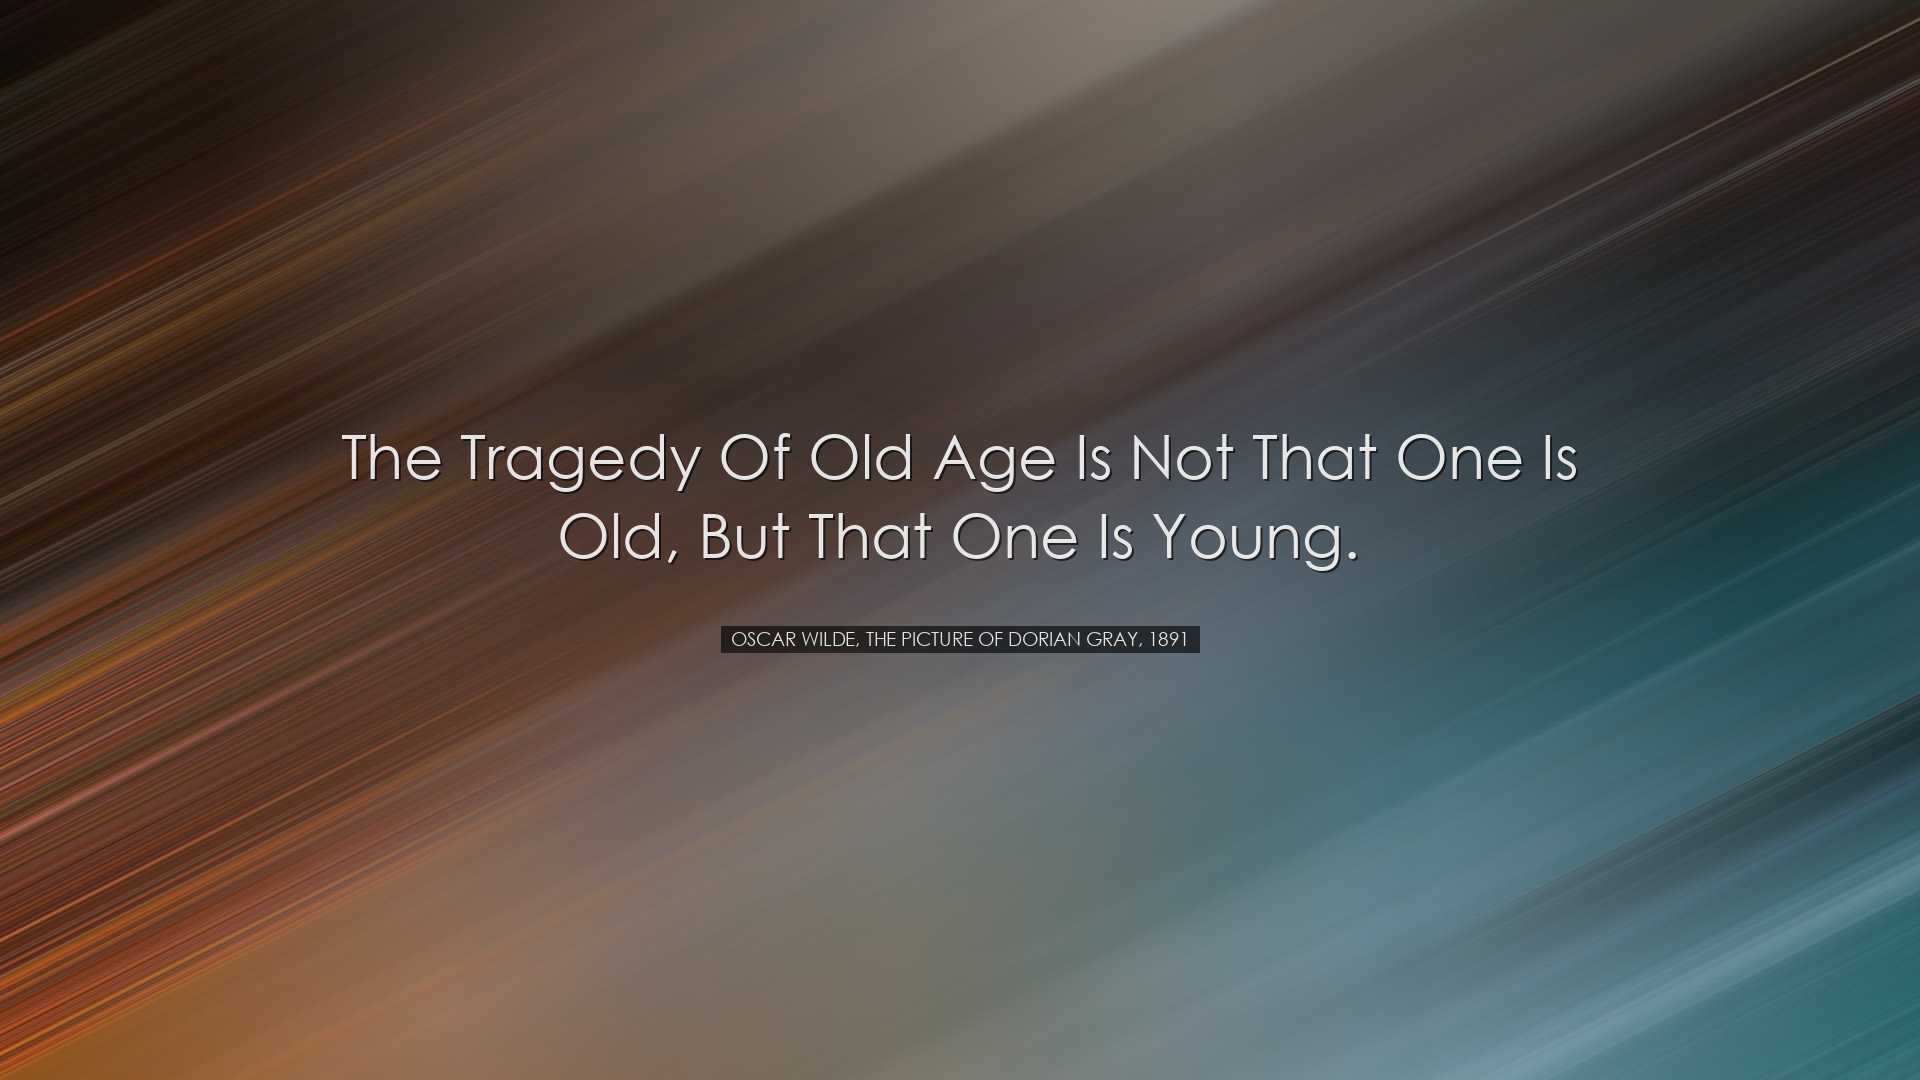 The tragedy of old age is not that one is old, but that one is you